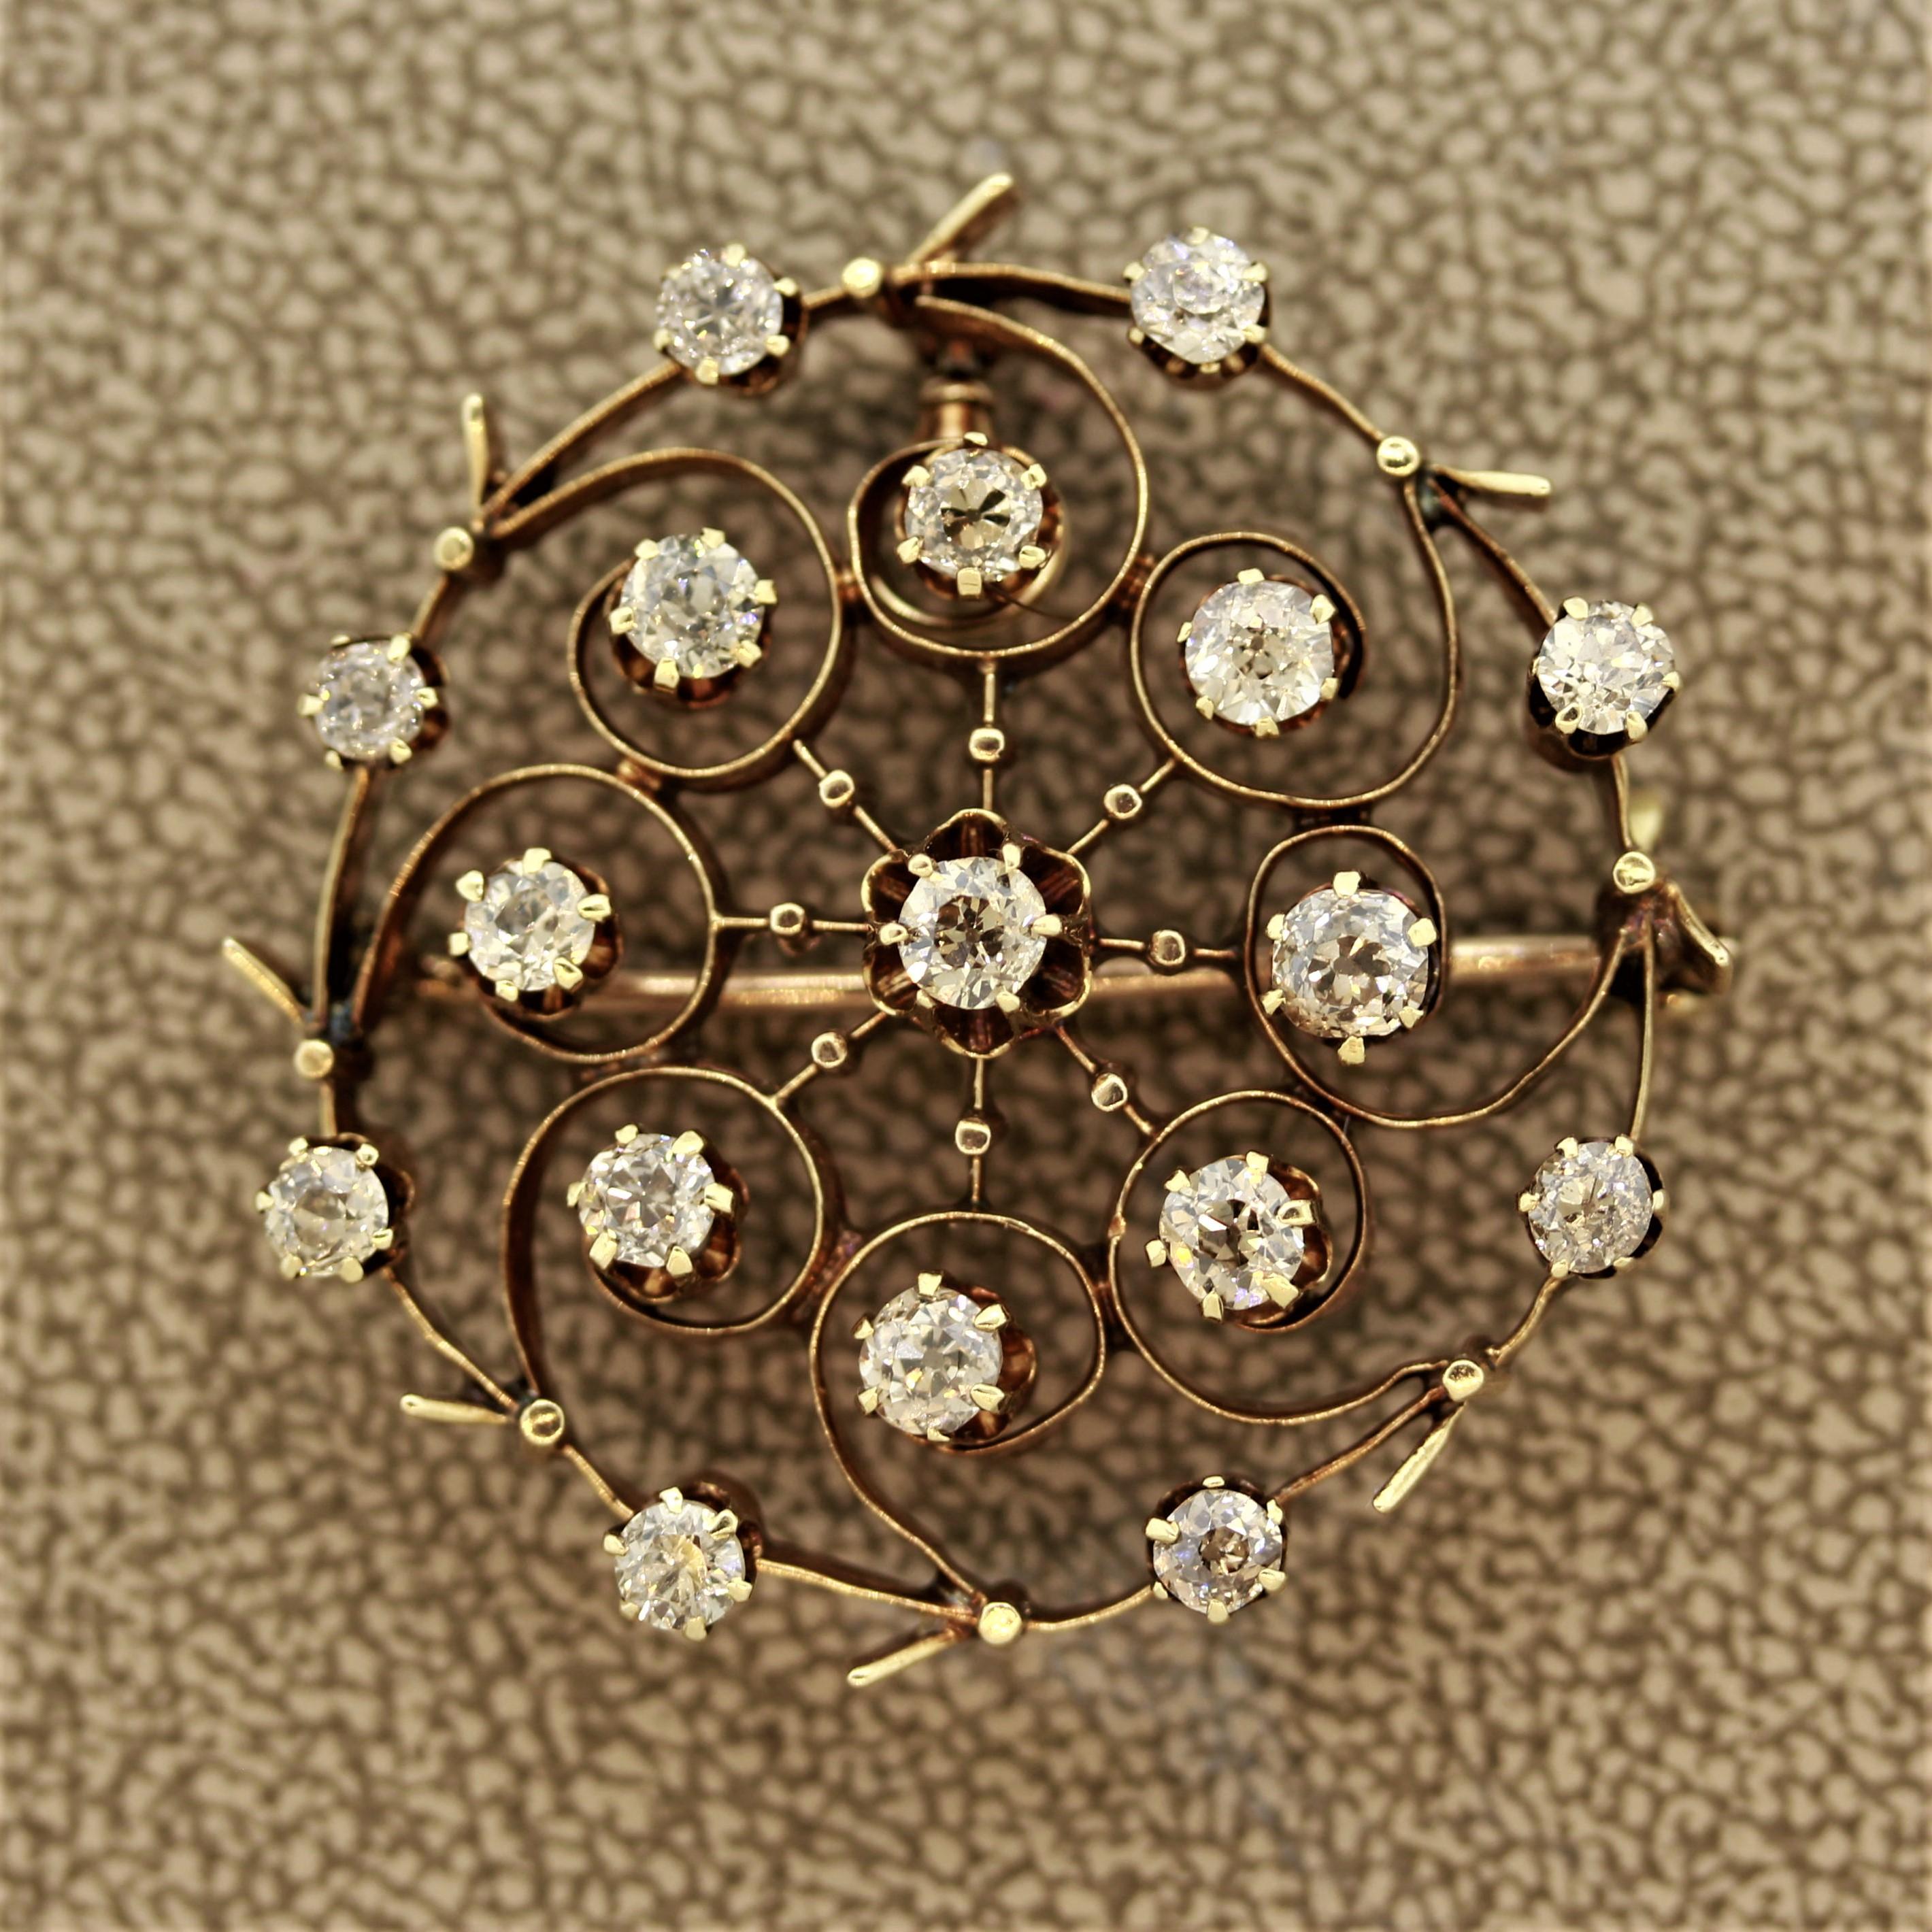 A sweet lightweight Victorian piece from the 1880’s. It features 17 round European cut diamonds weighing a total of 2.25 carats. Made in 14k gold and can be worn as a pendant or brooch.

Length: 1.25 inches